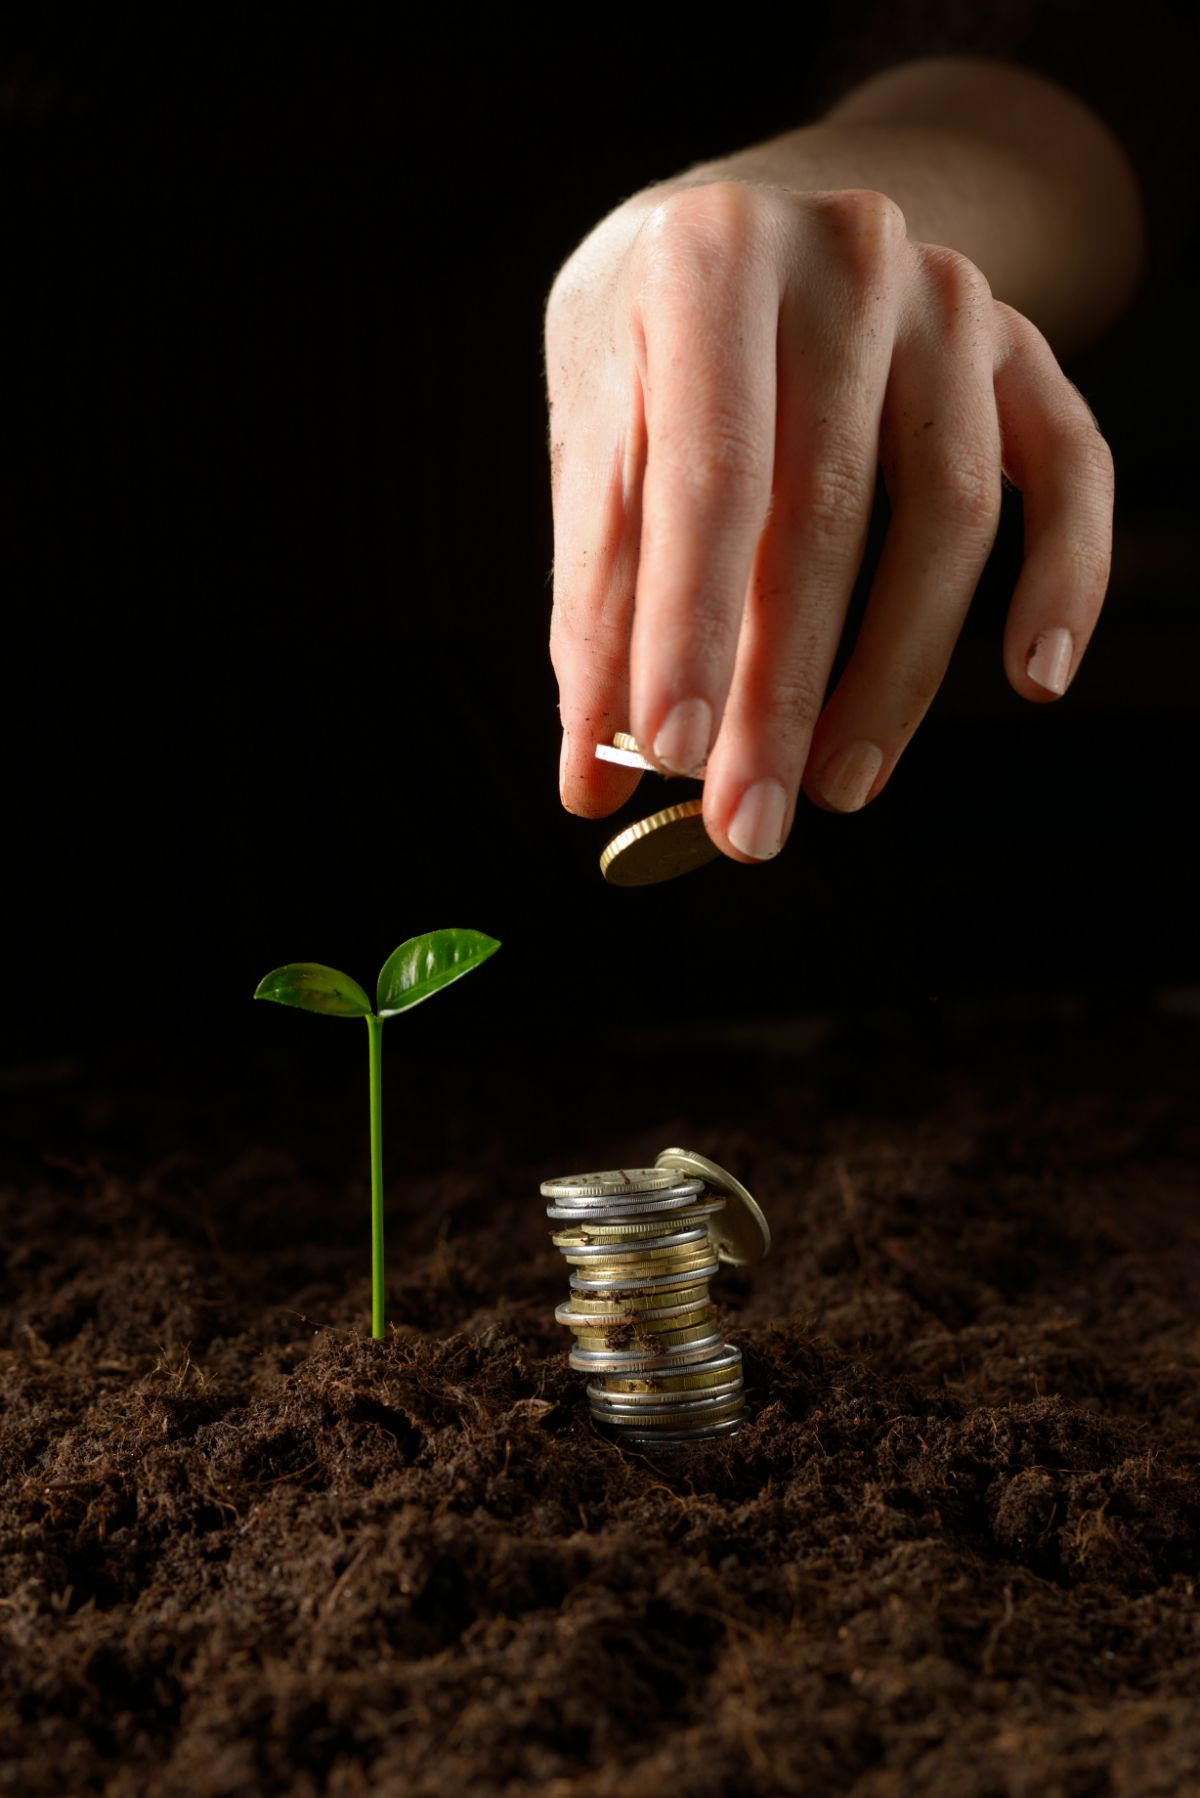 Woman’s hand placing coin atop a pile of coins sitting in dirt next to a growing plant.